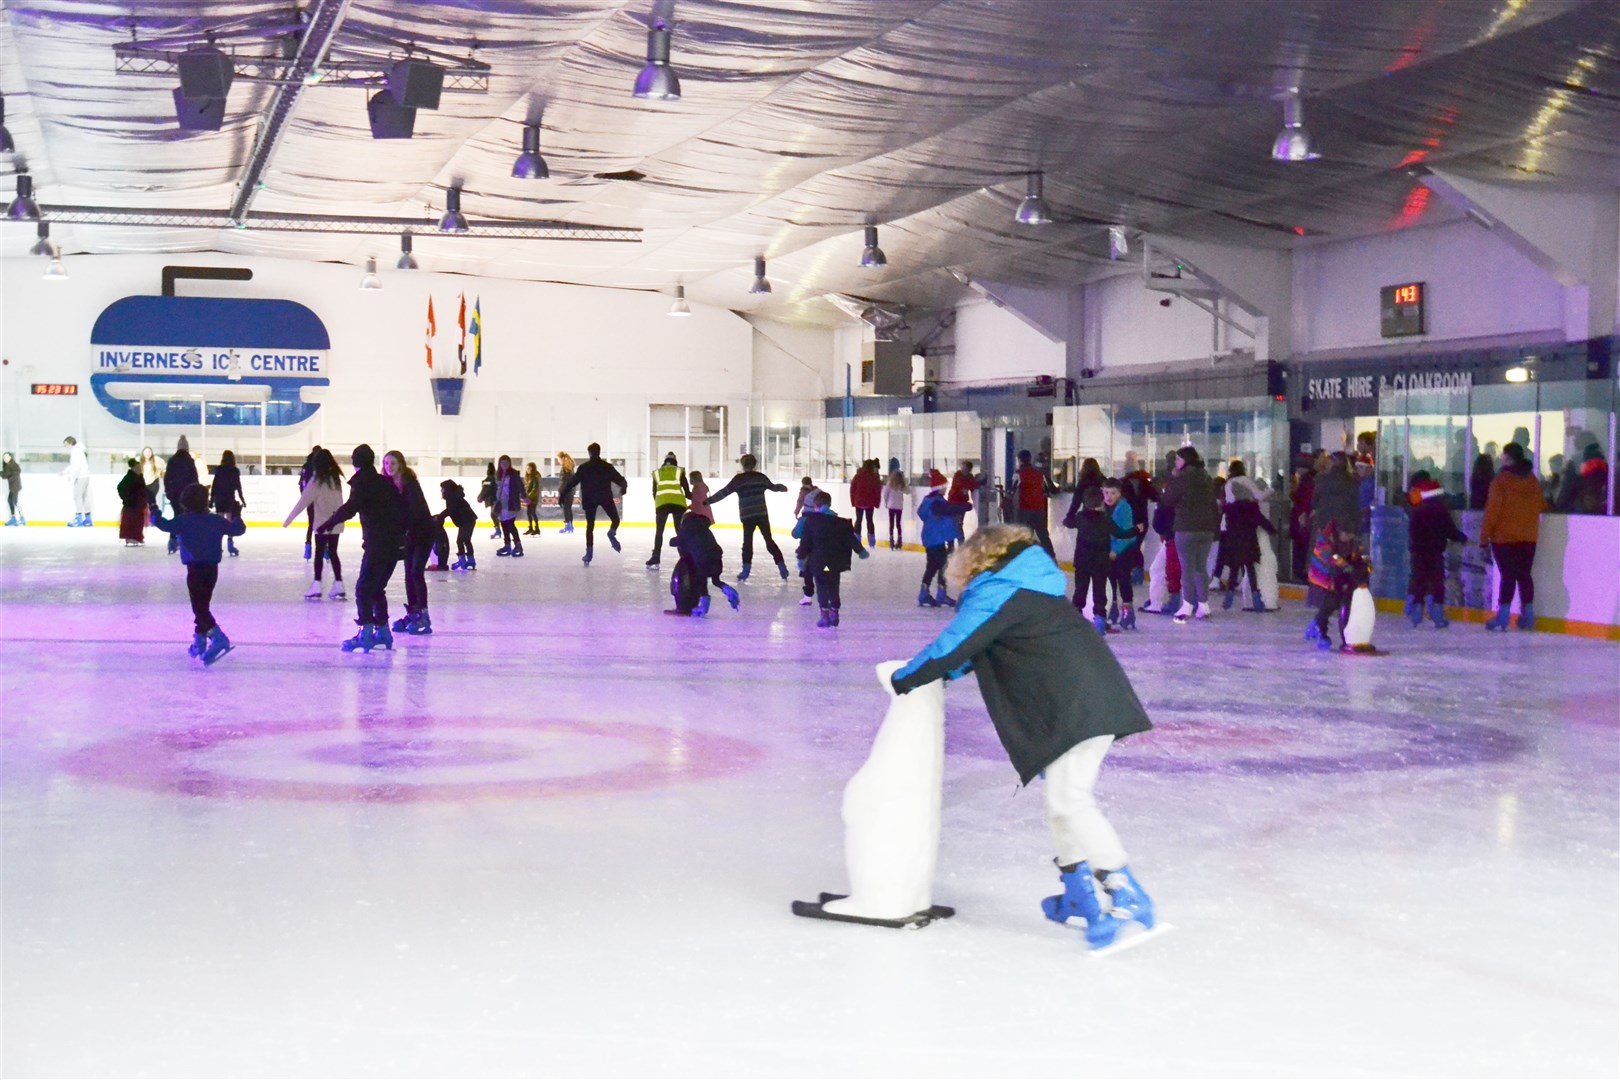 The ice rink was packed with young carers for the ice disco. Copyright Paul Donald